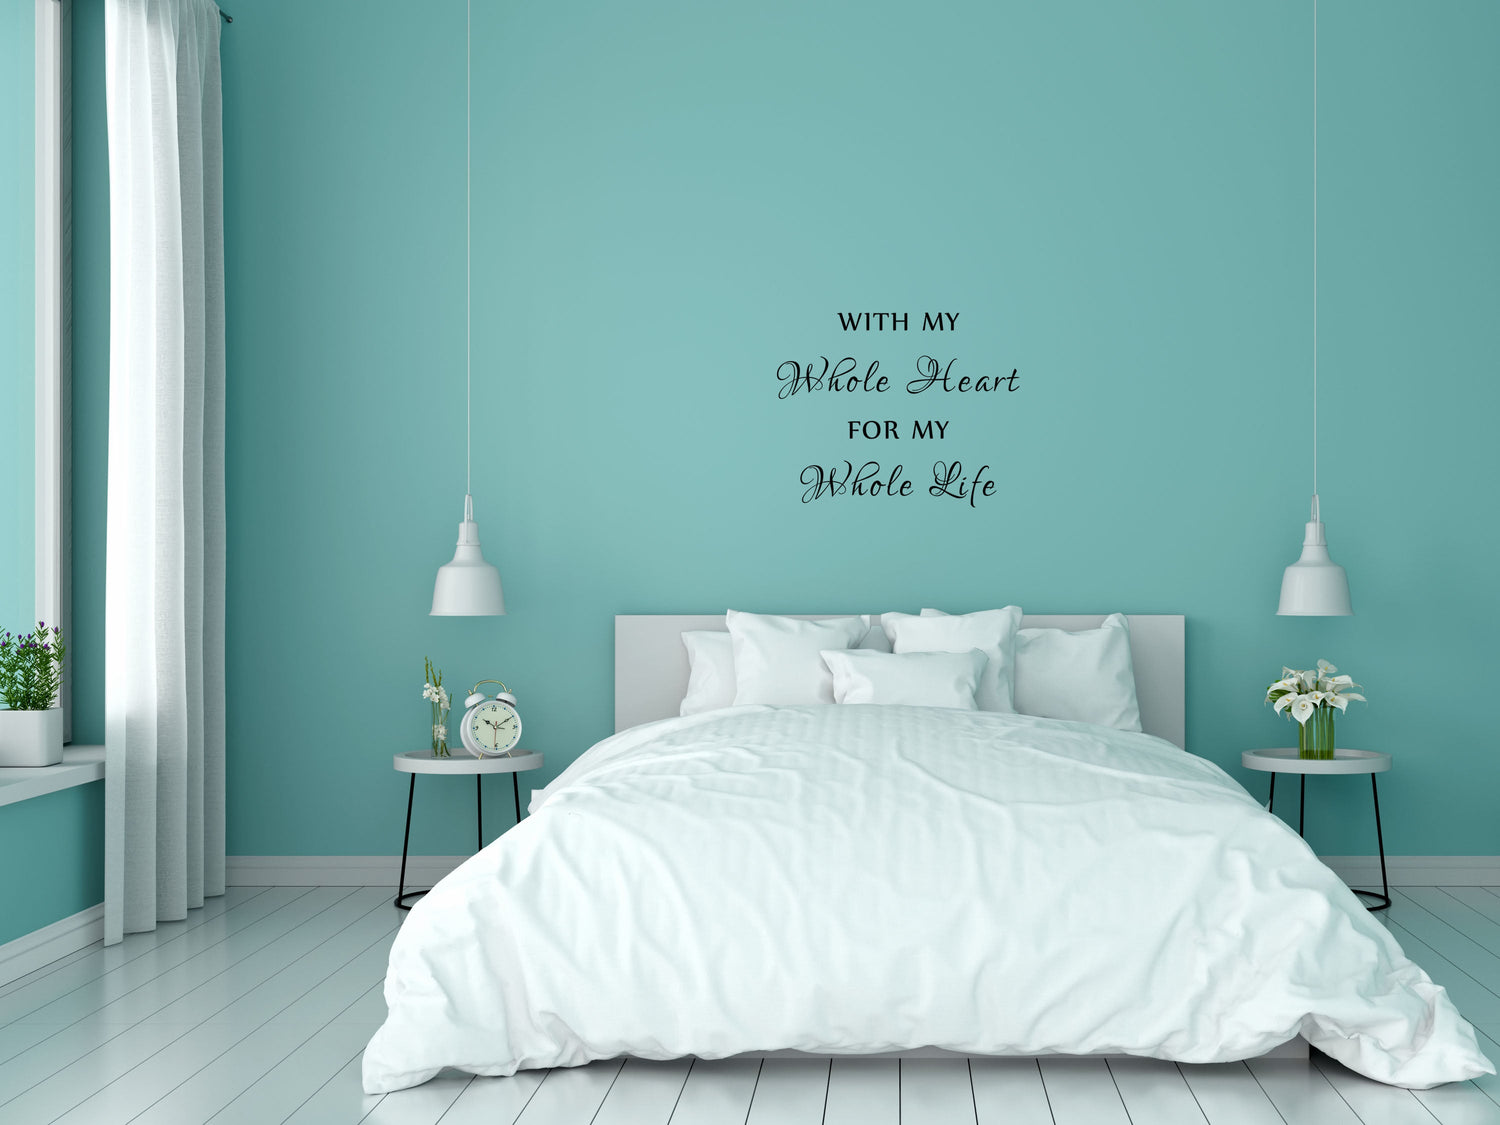 With My Whole Heart For My Whole Life Home Decor Decals Inspirational Wall Signs 